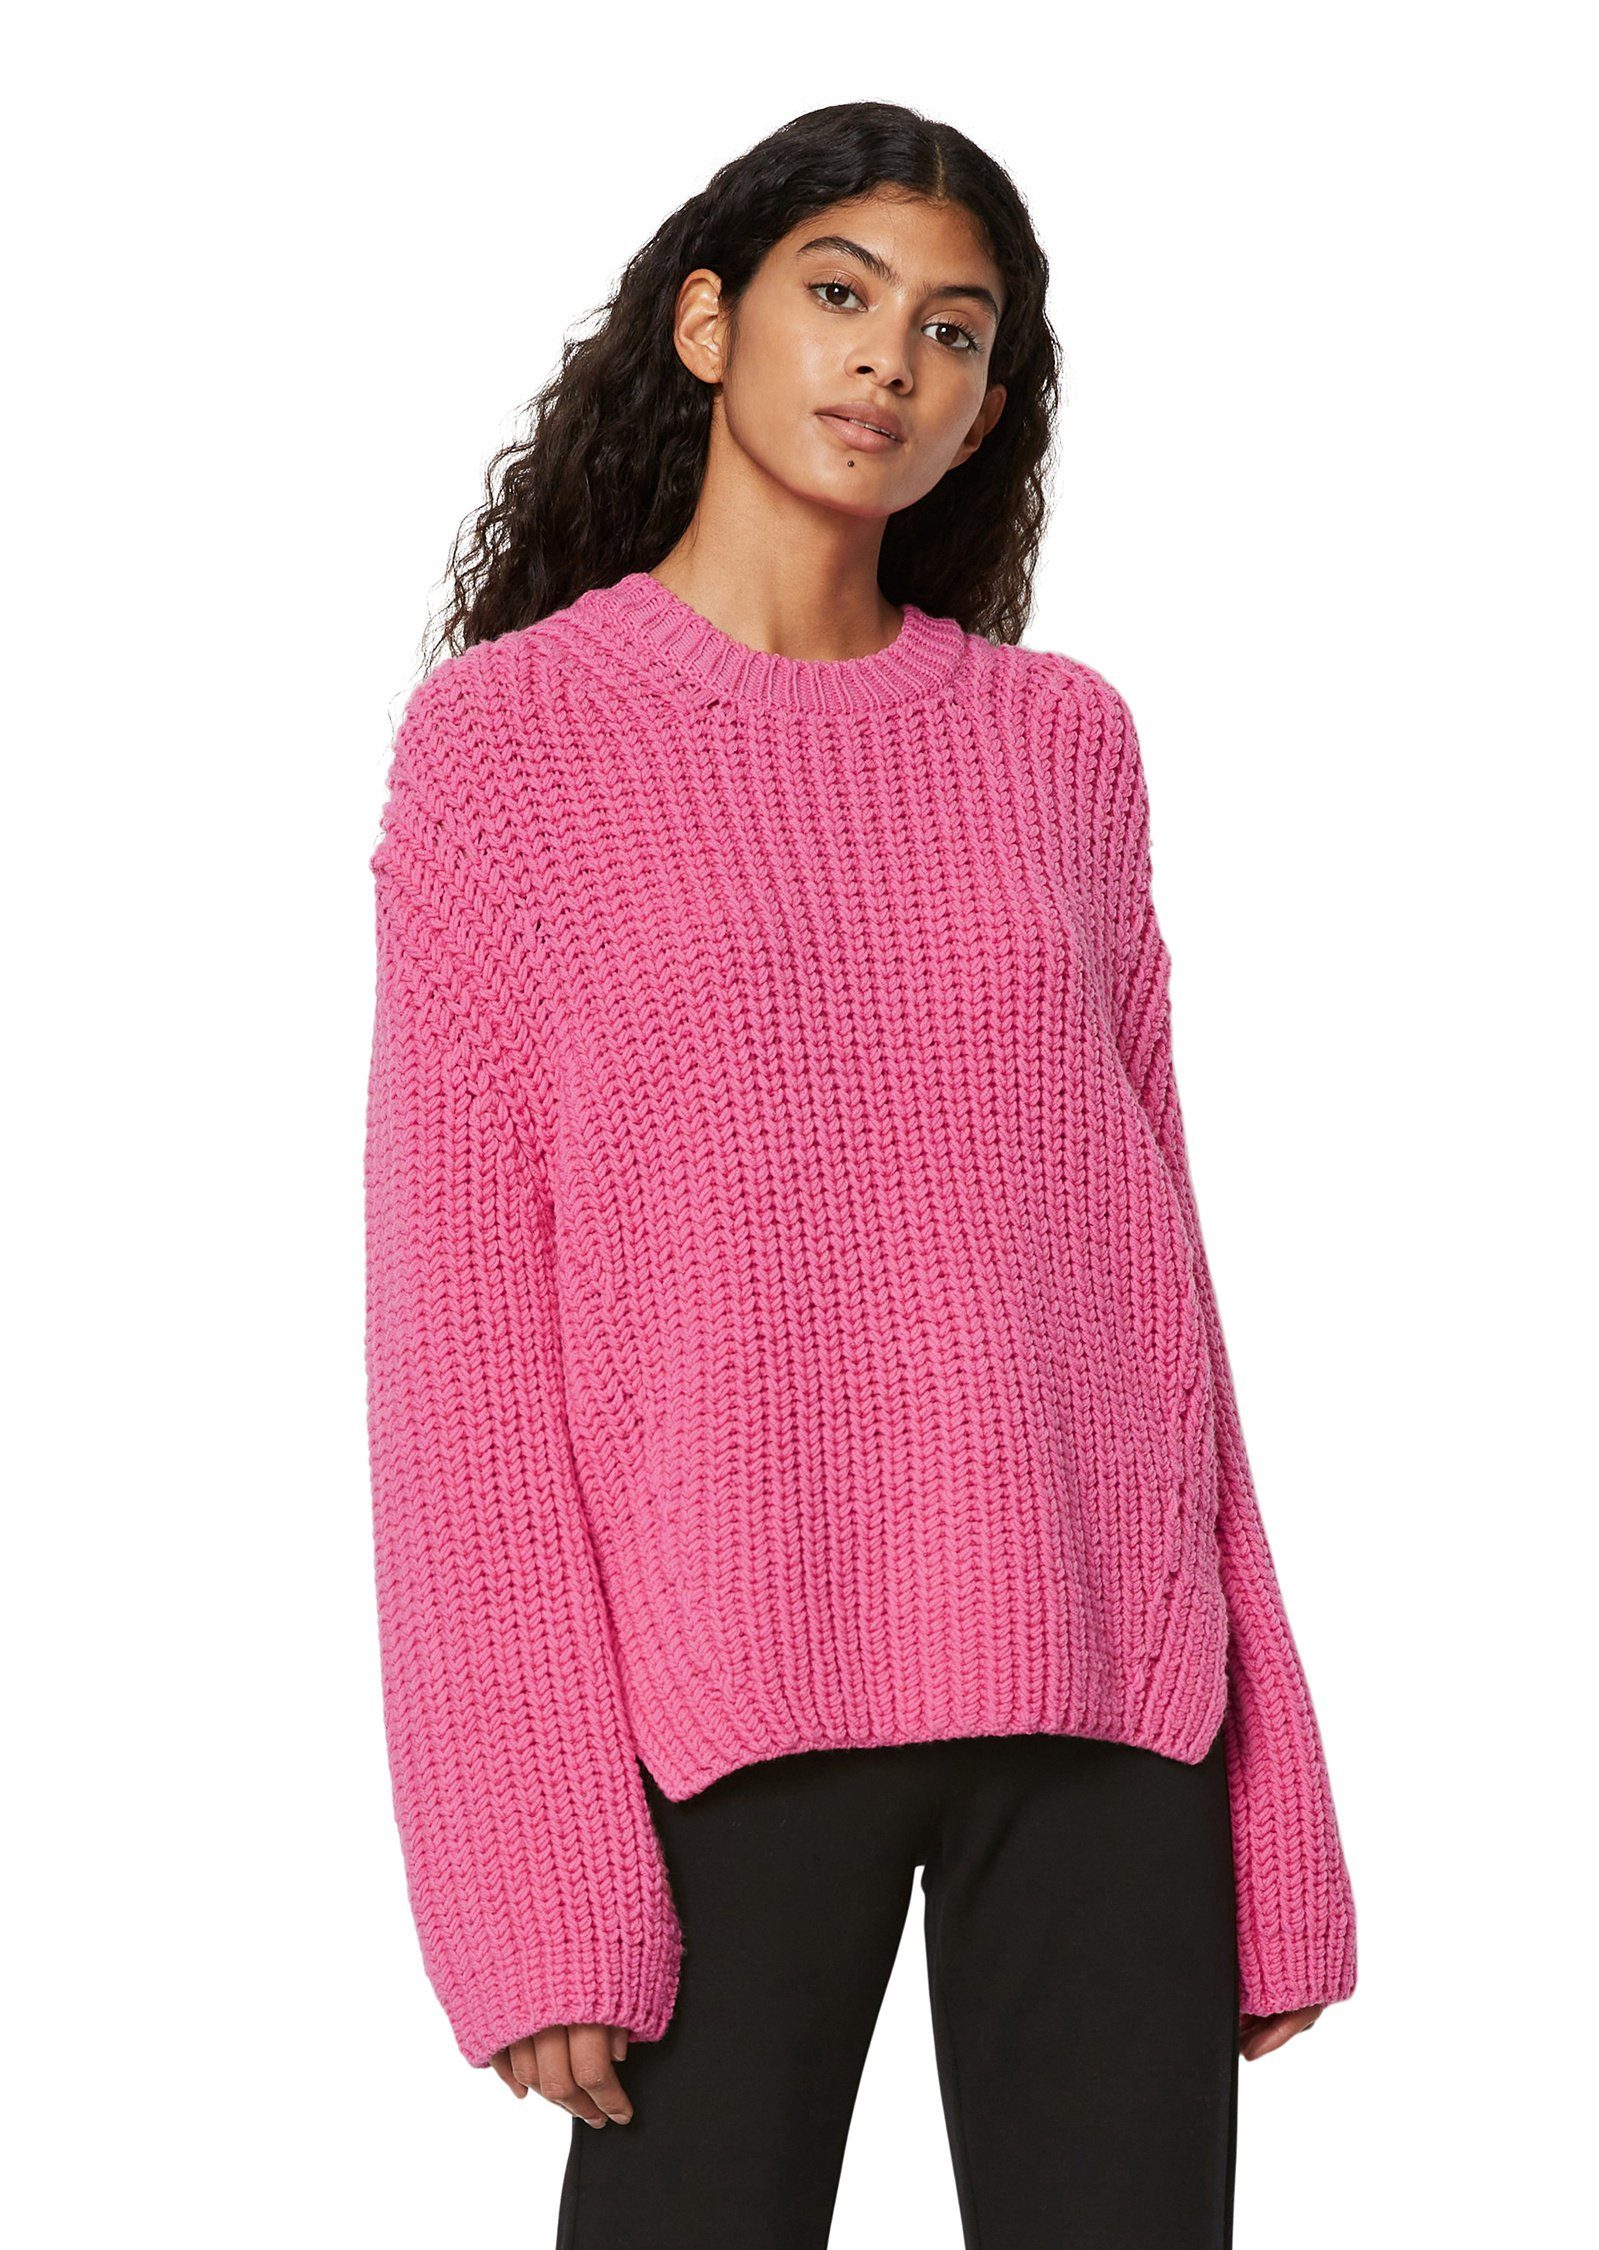 Marc O'Polo Strickpullover softer Schurwolle rosa aus